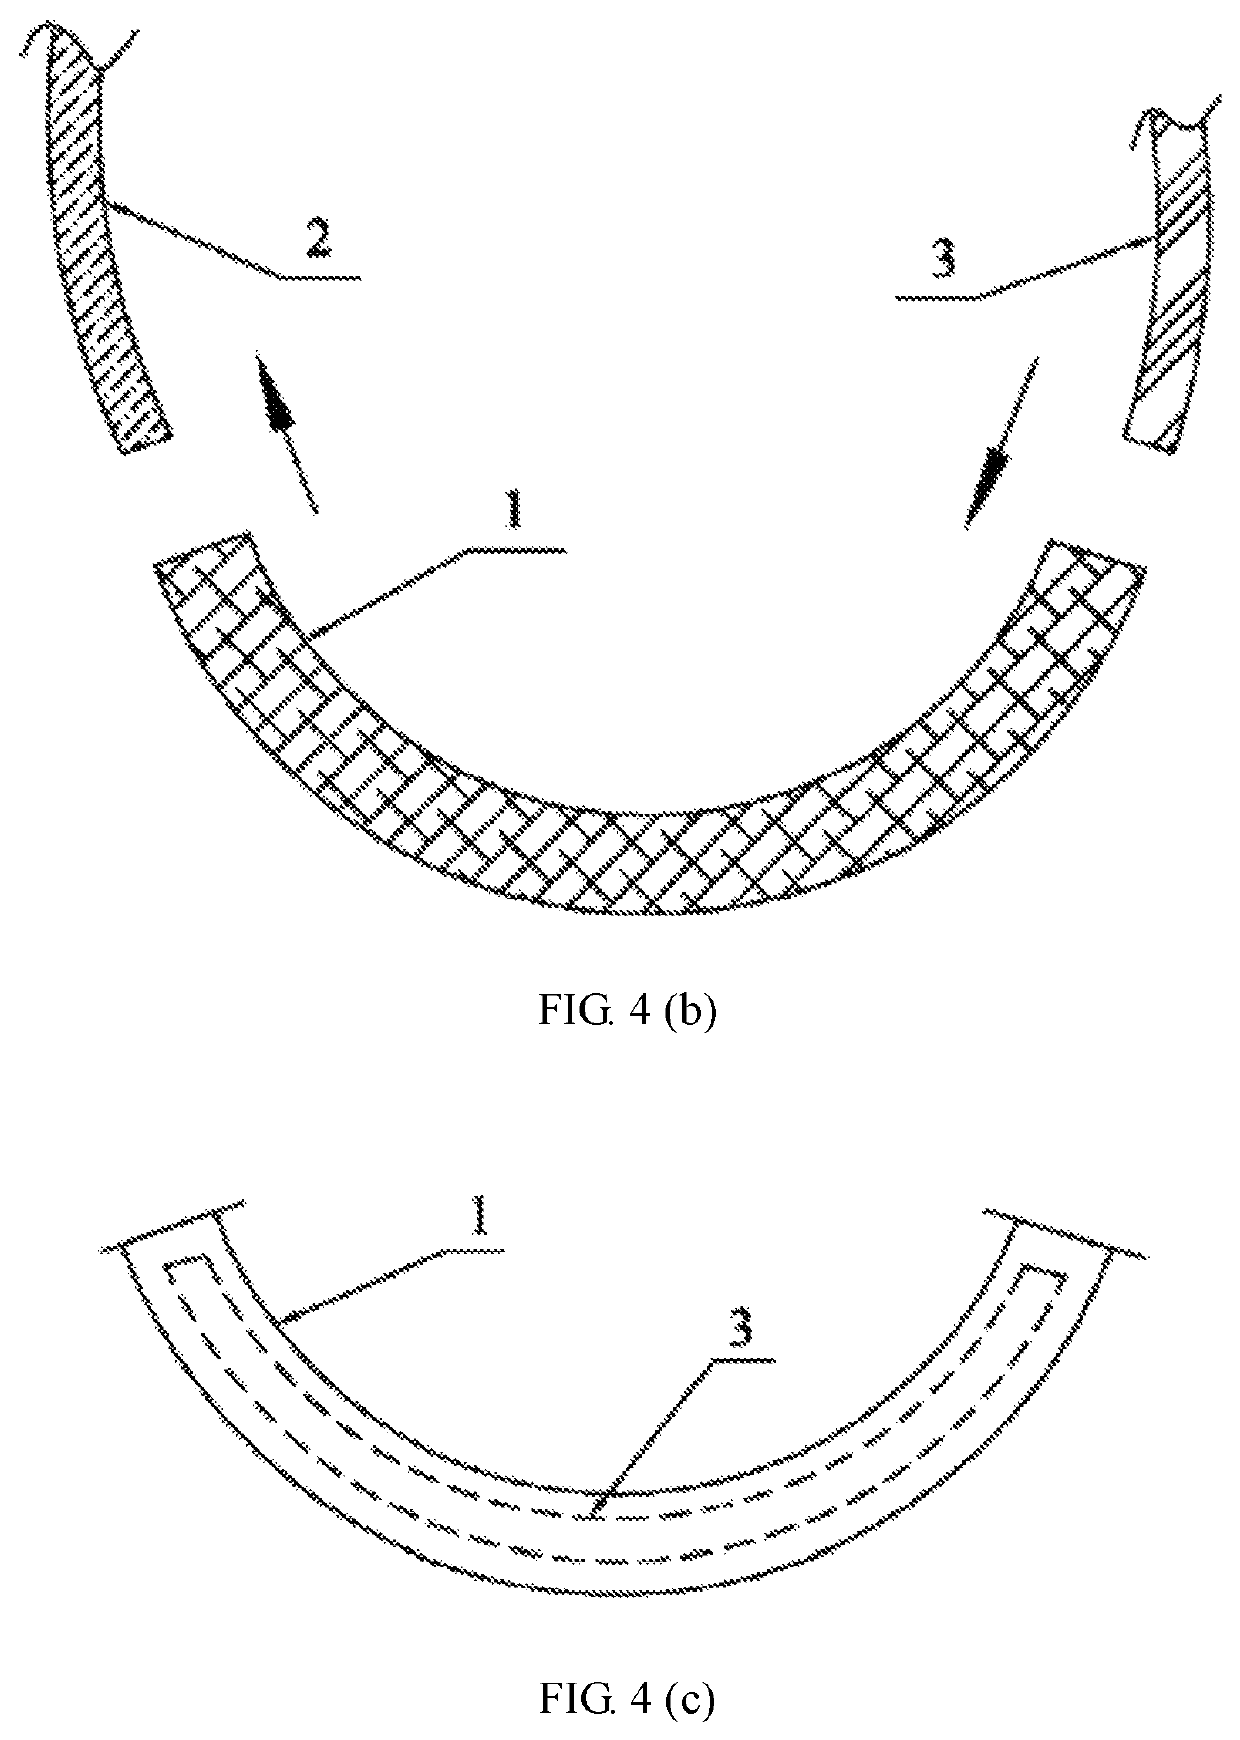 Sheath for bra wire ring and method for manufacturing bras using the same